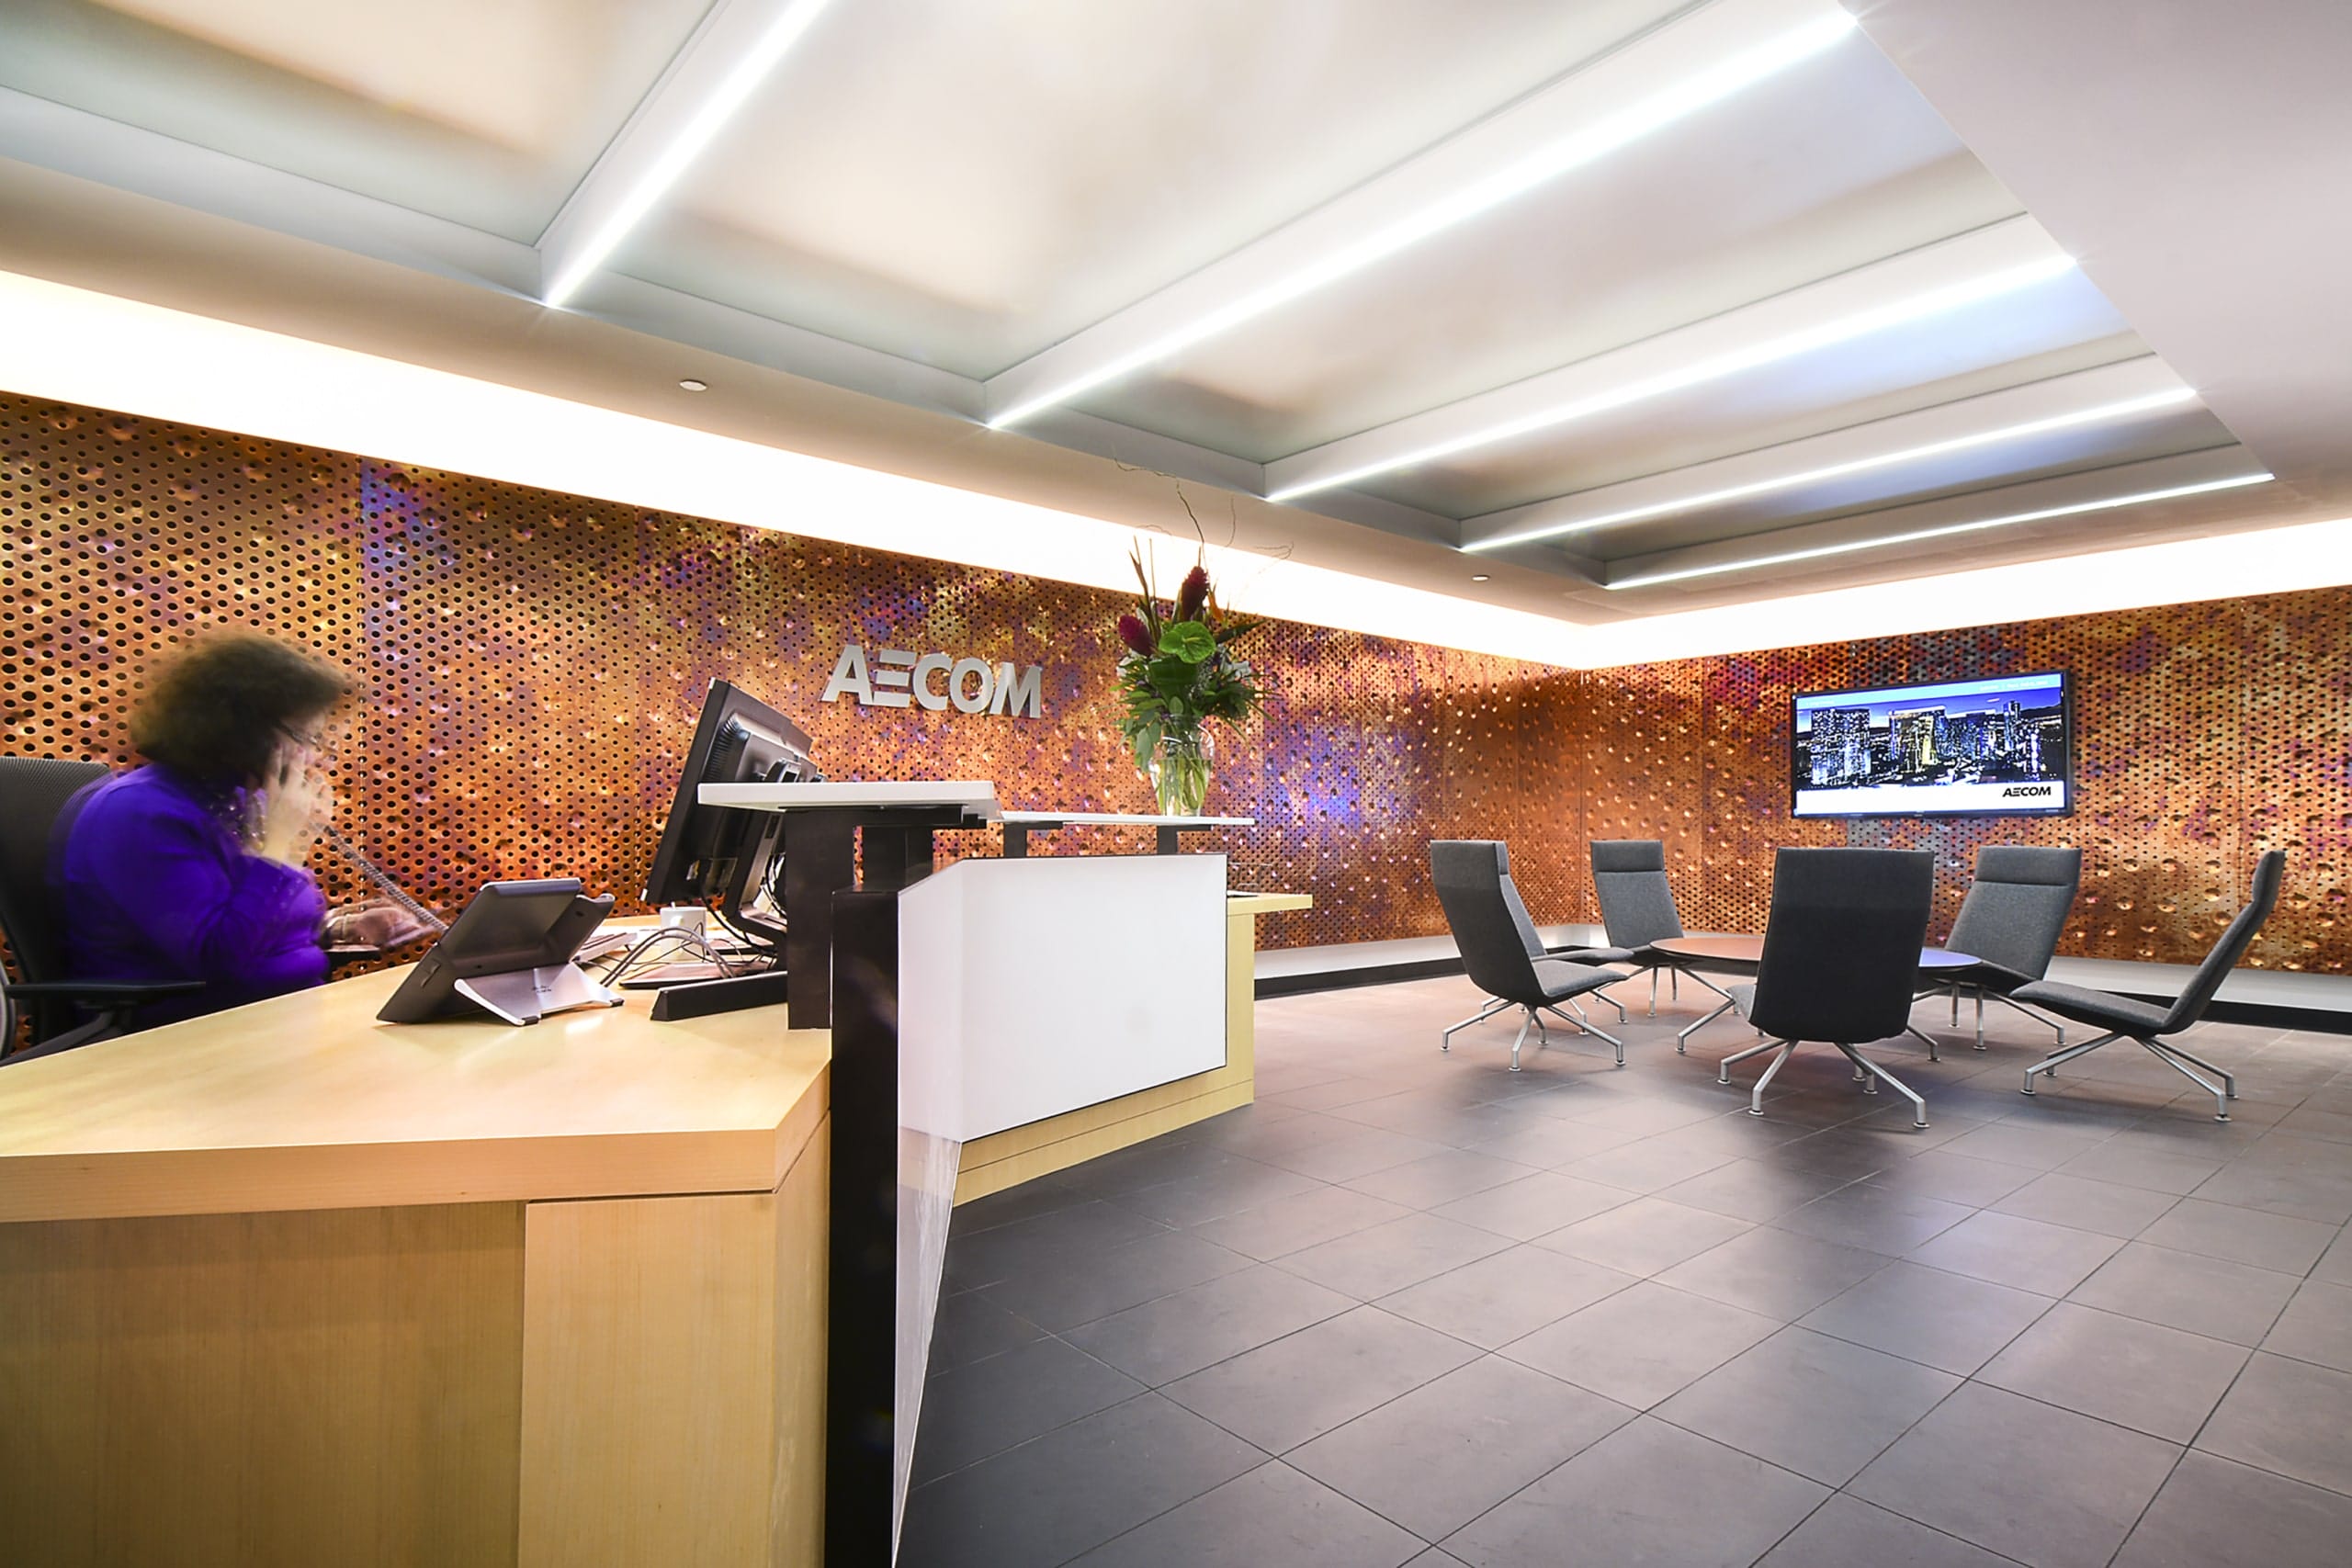 AECOM CLEVELAND OFFICE RECEPTION AREA WITH EMBOSSED DIRTY PENNY SURFACE